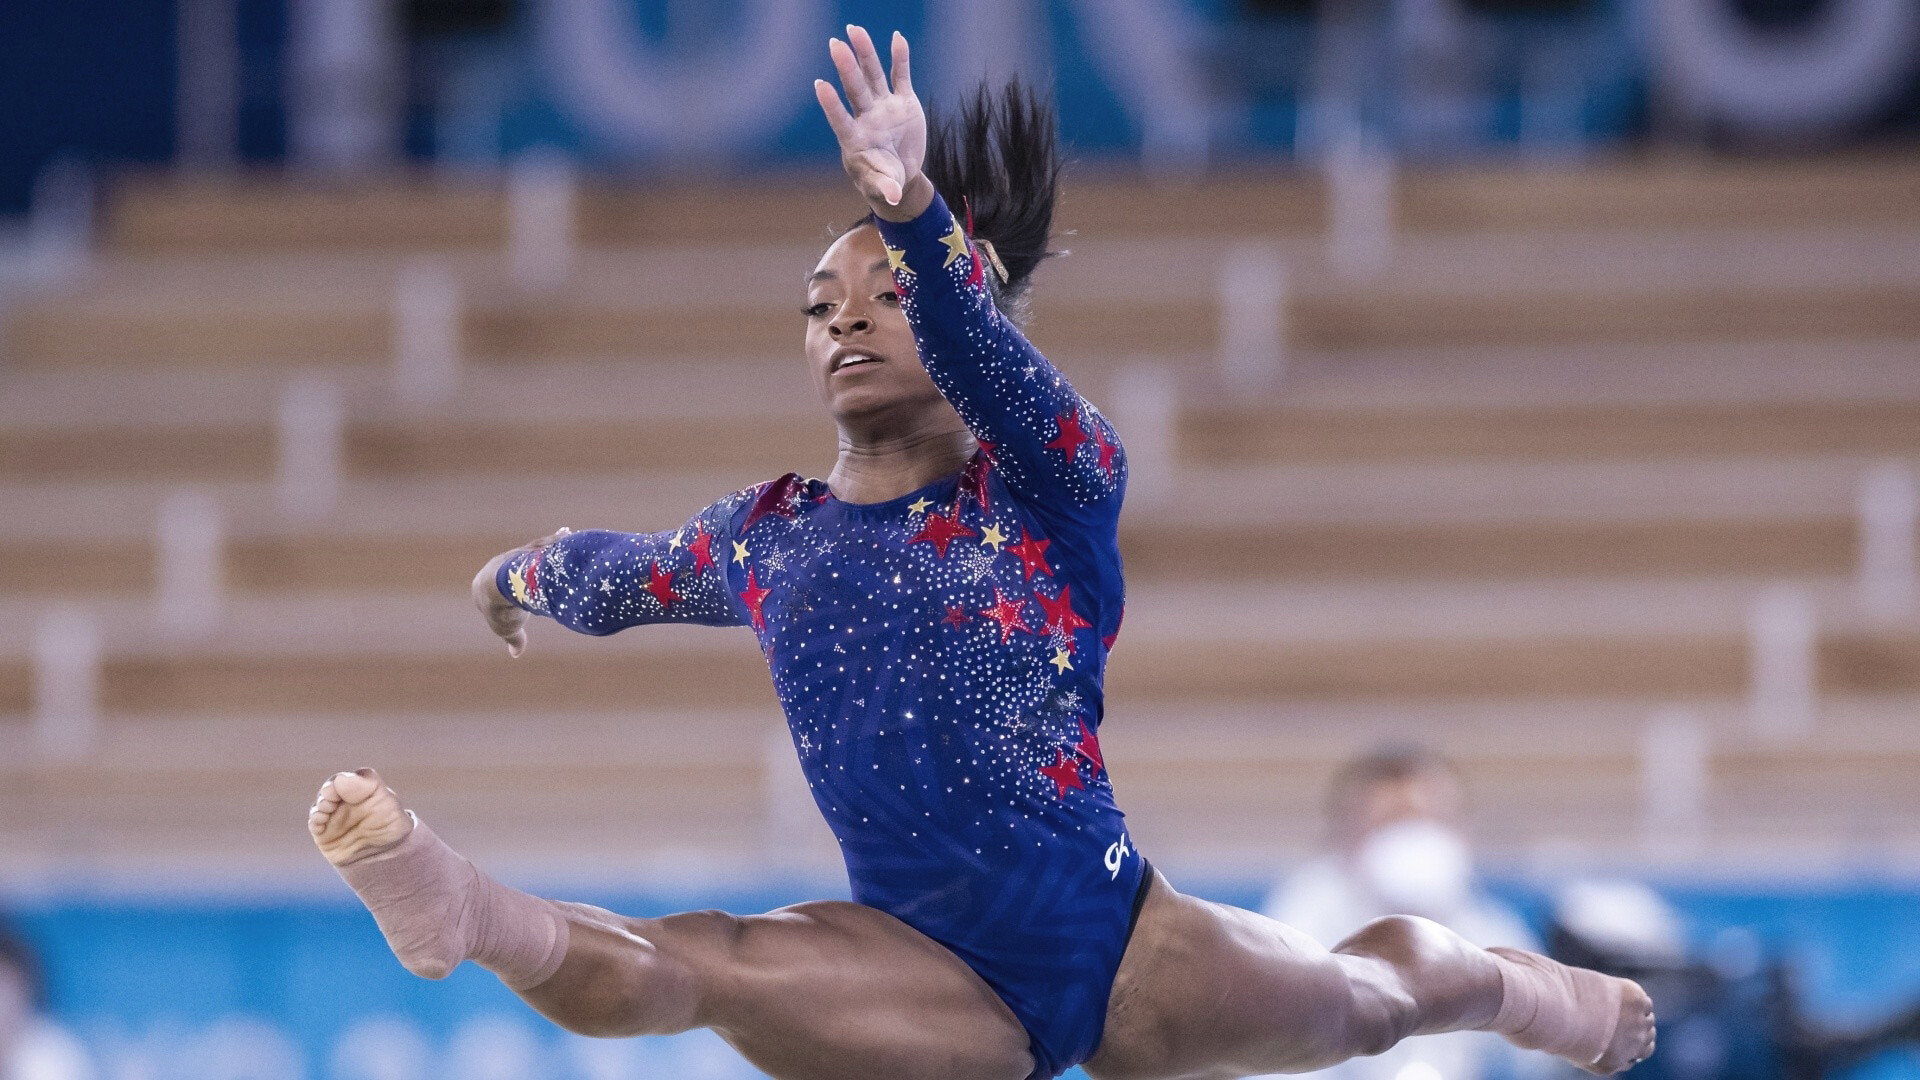 Simone Biles: She won the all-around title at the U.S. Classic in July 2018. 1920x1080 Full HD Wallpaper.